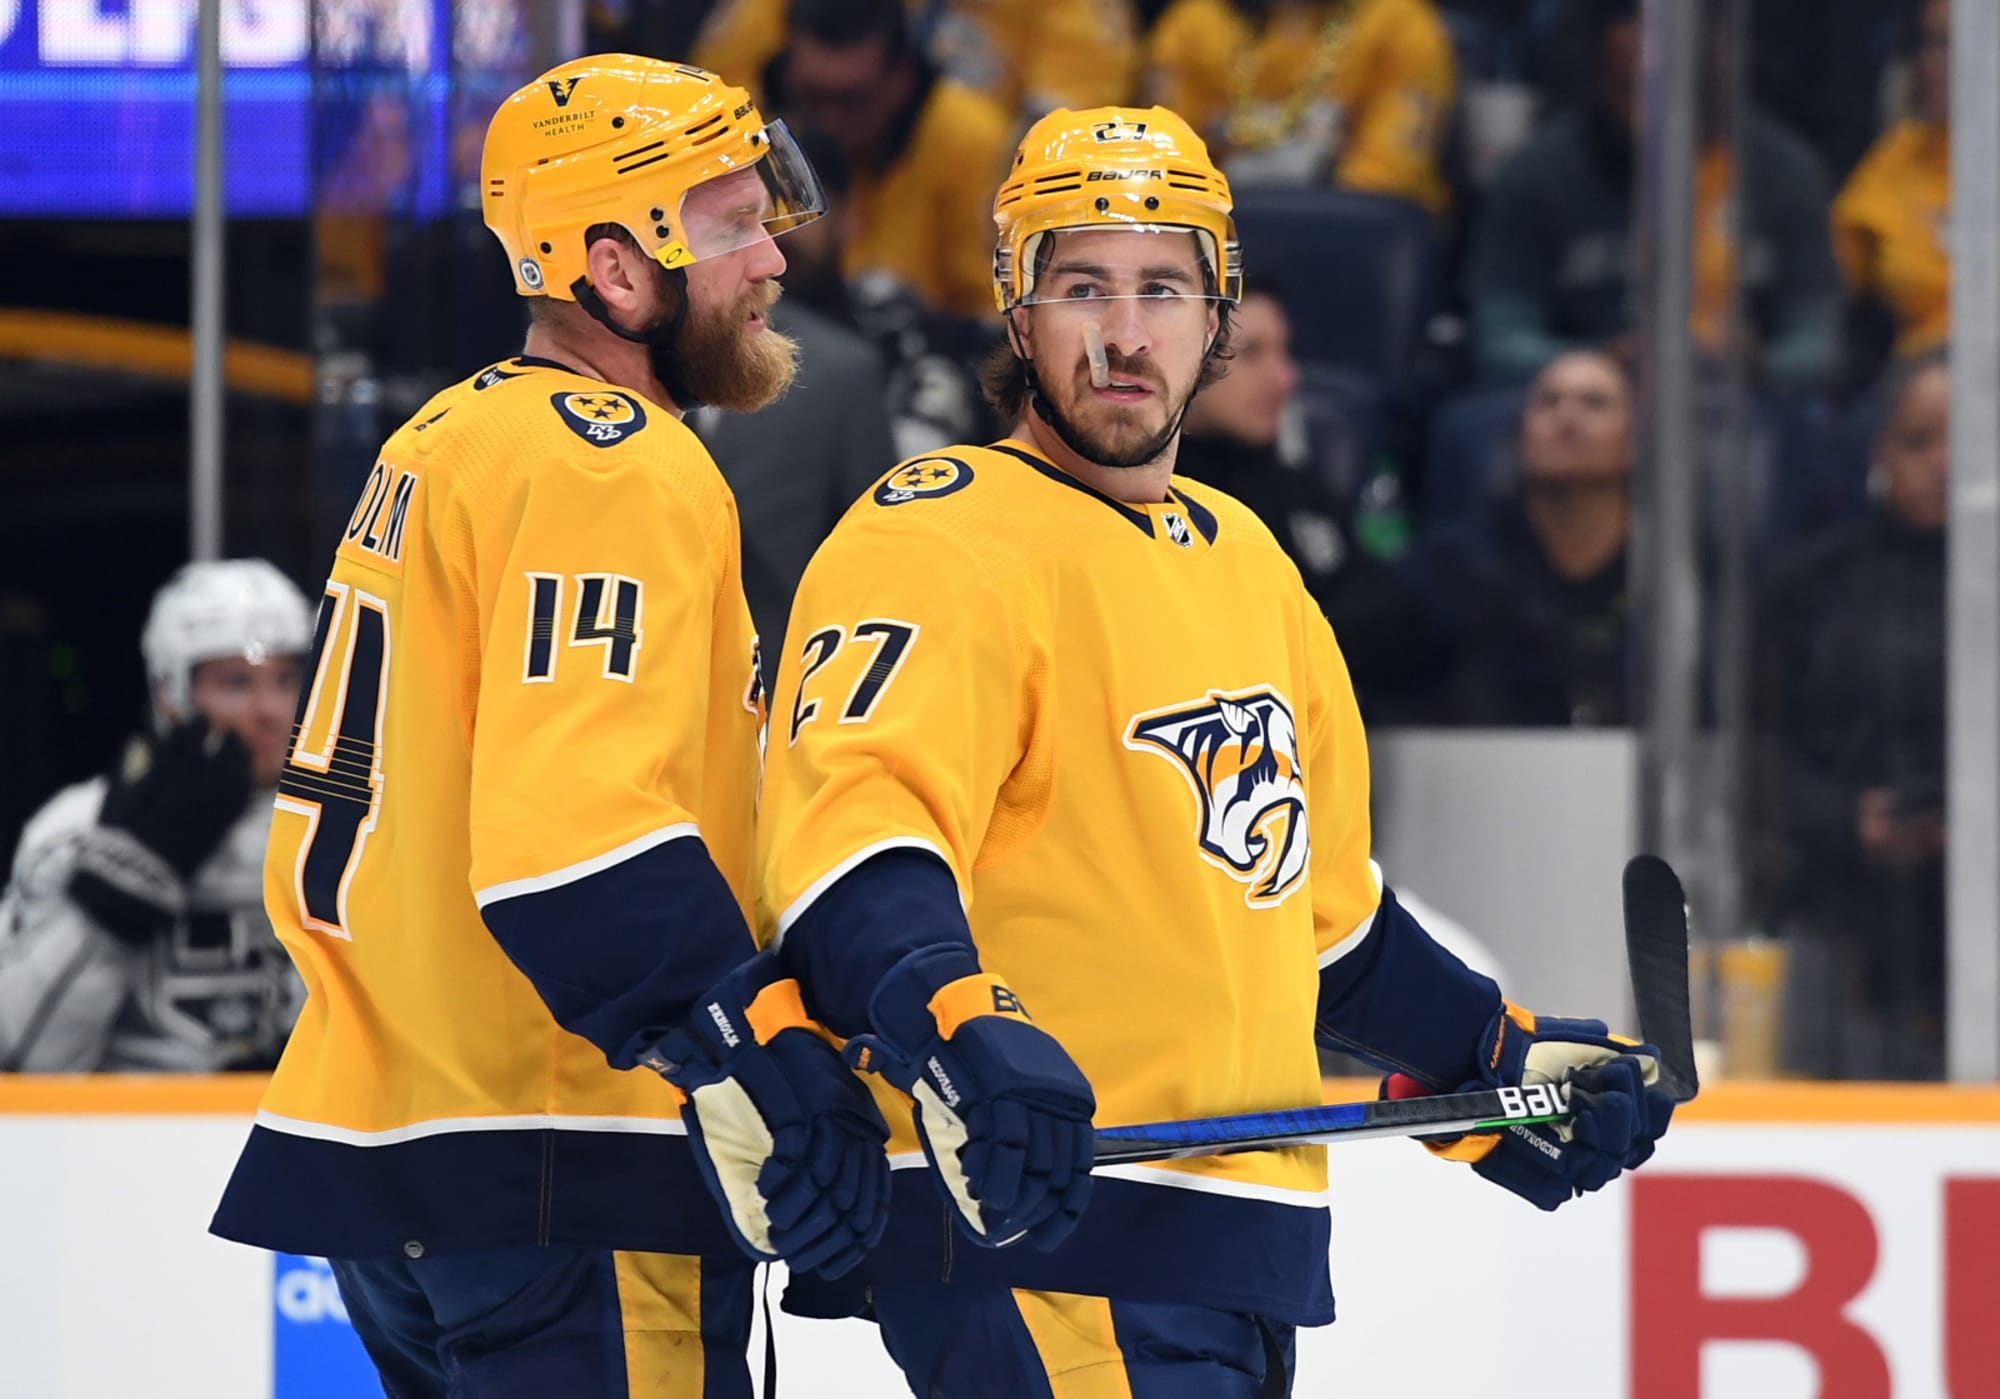 Fabbro hungry for success with Predators - Tri-City News